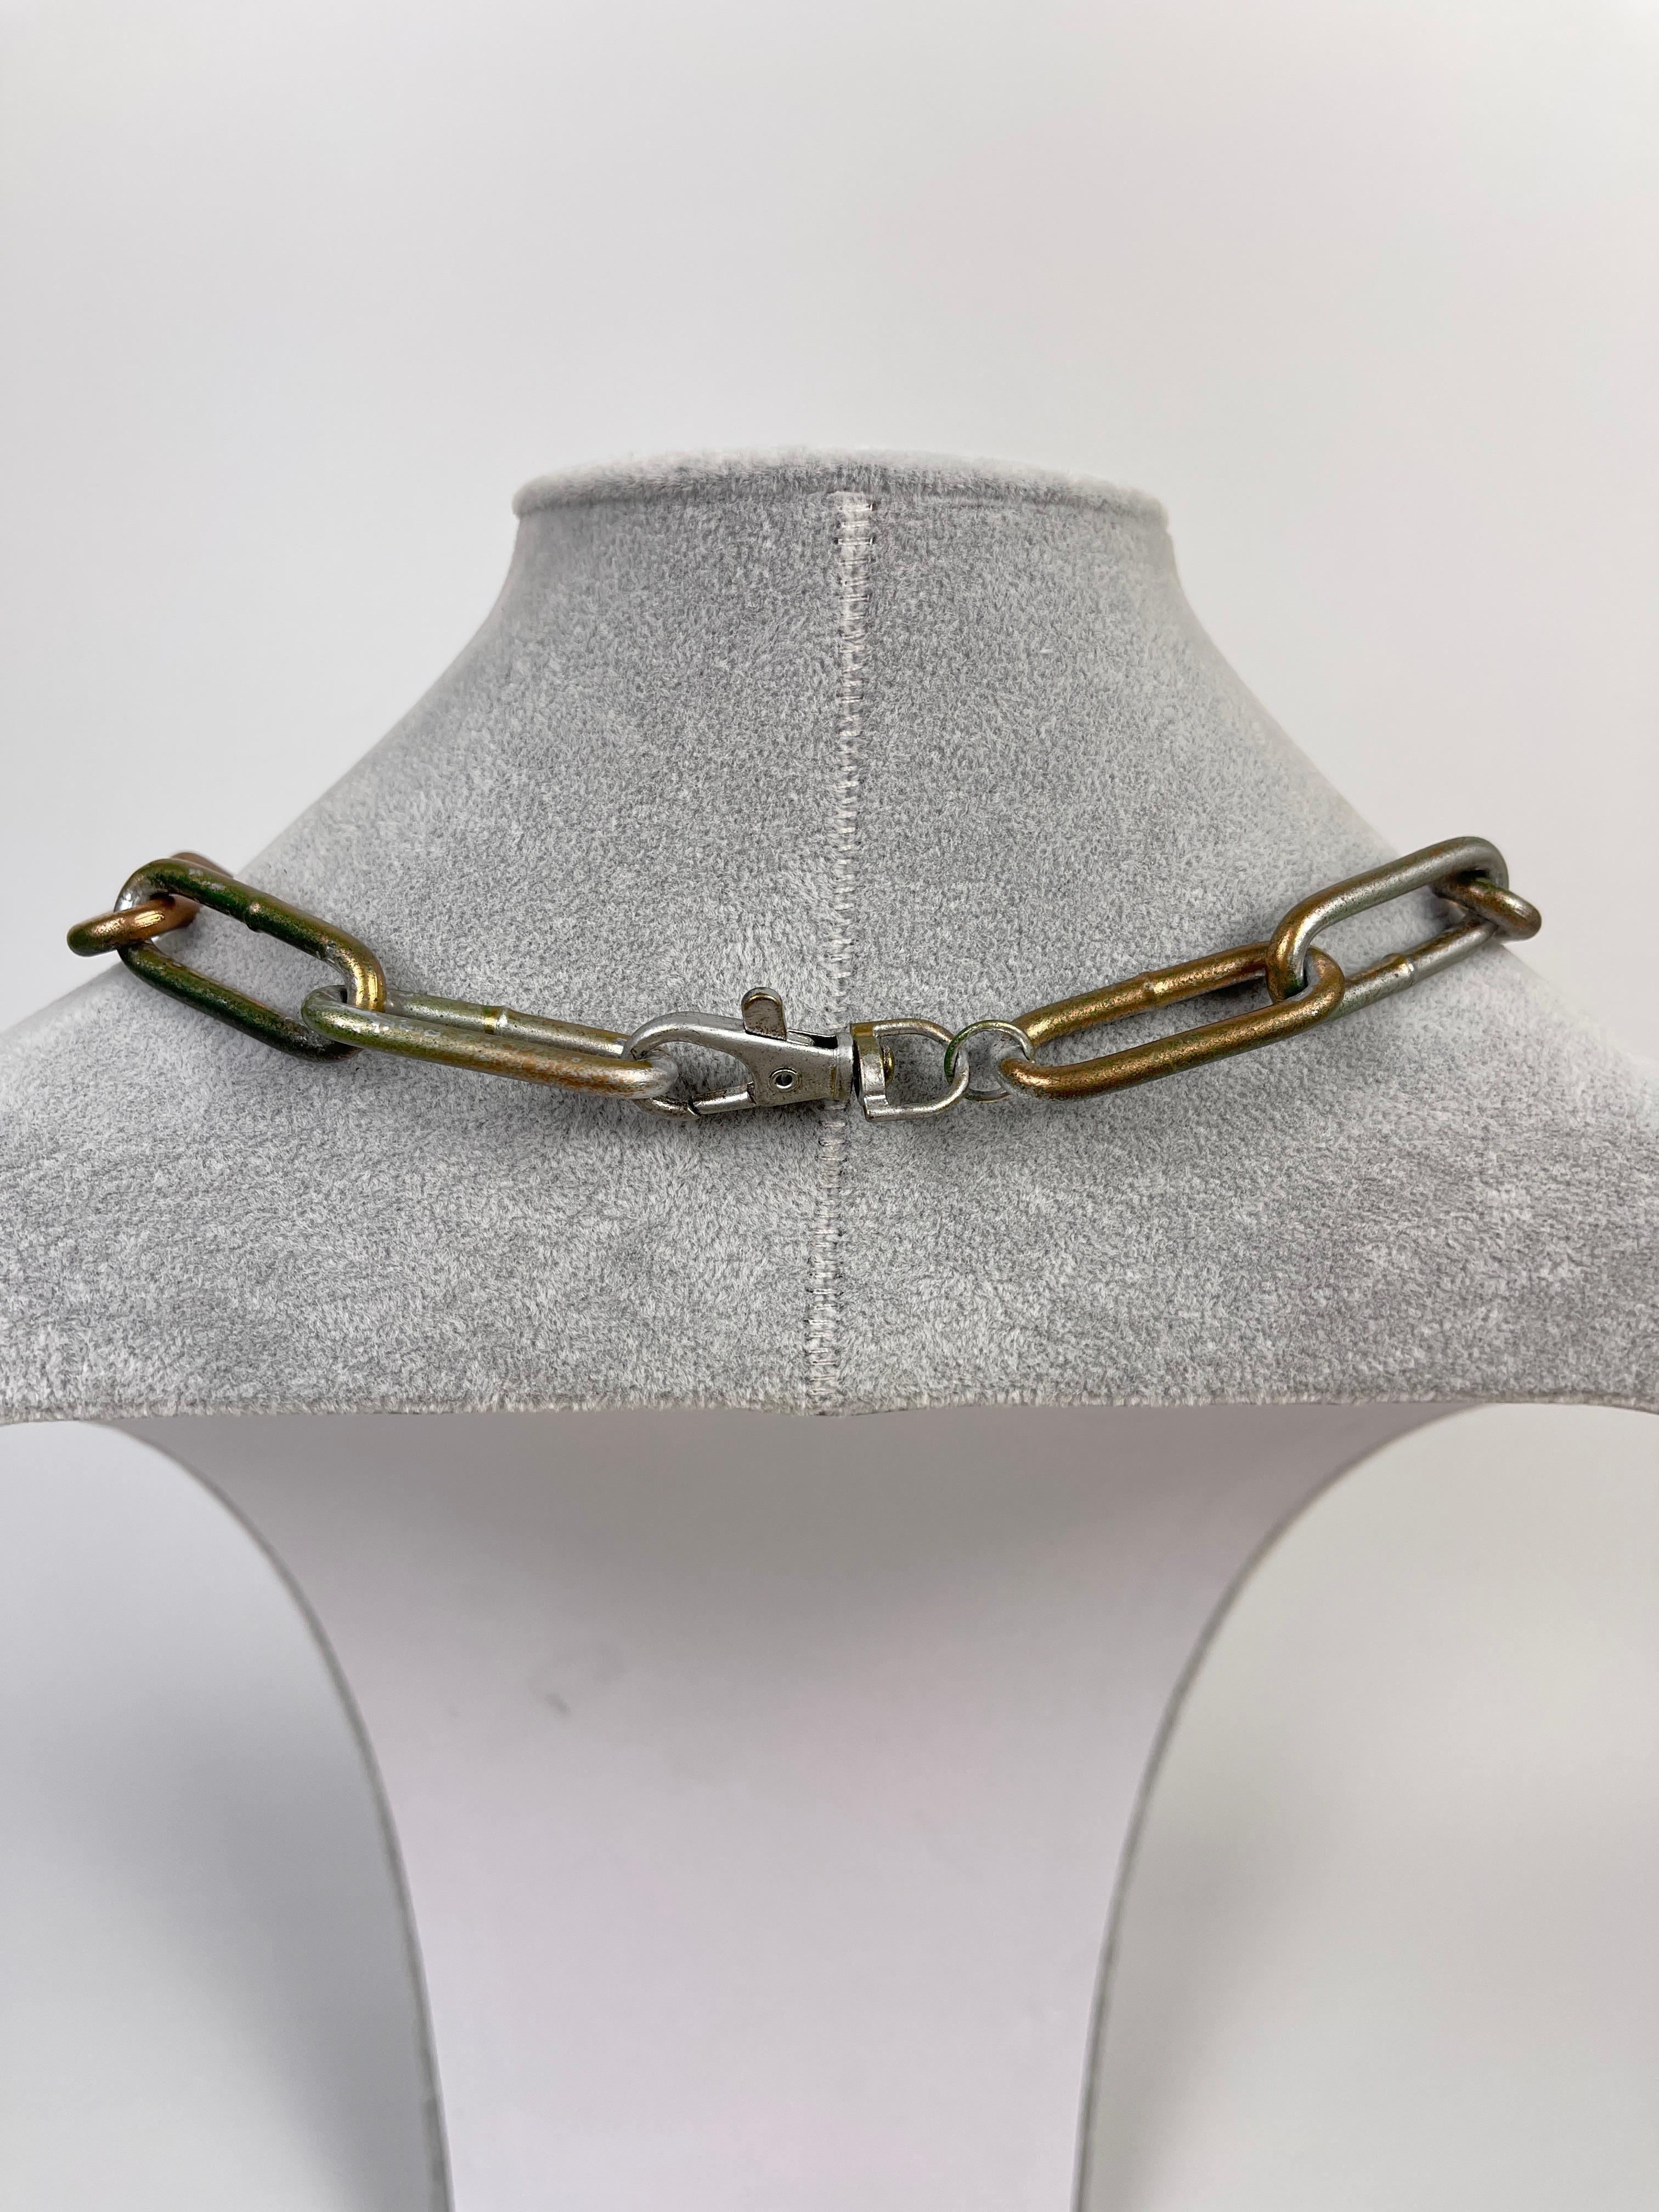 Jean Paul Gaultier 1990's Staff Sample Rosario Bull Necklace For Sale 3